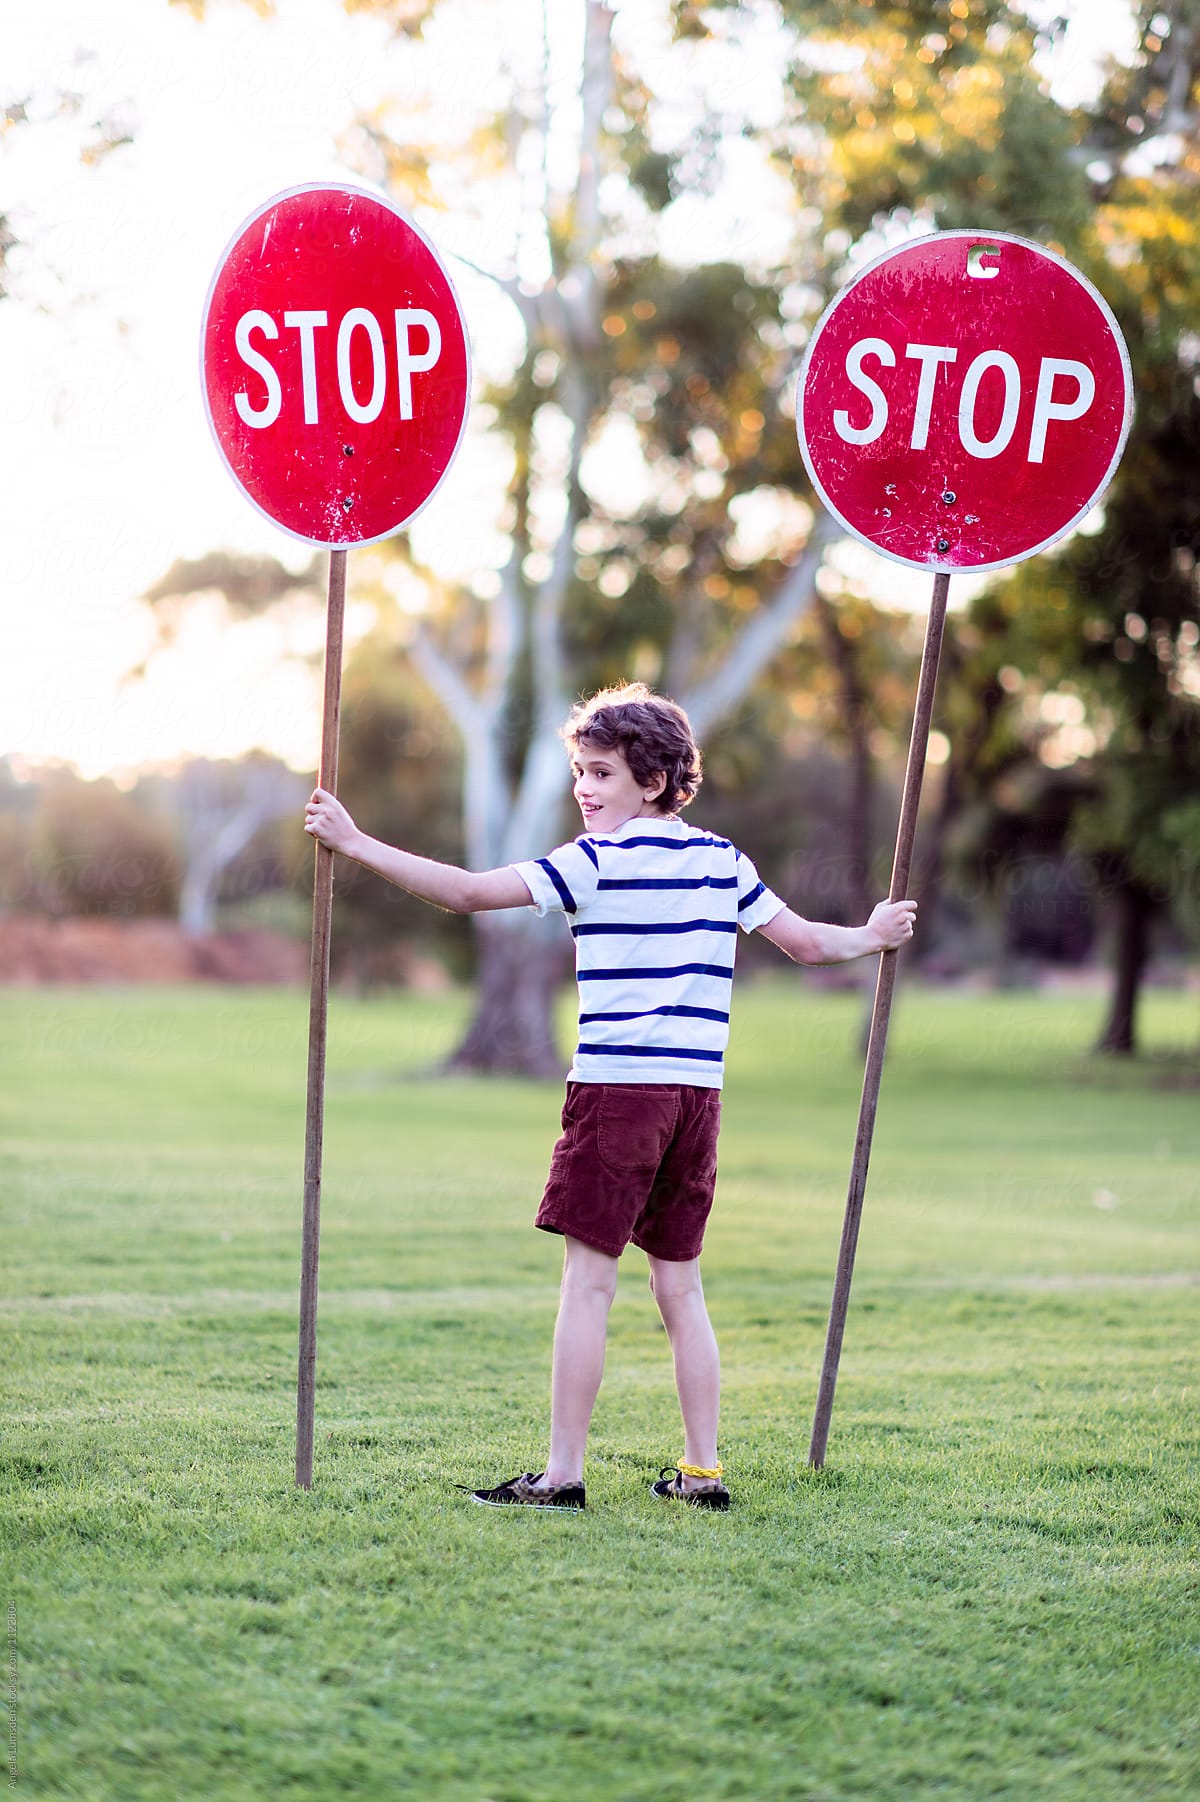 Boy with two stop signs in park